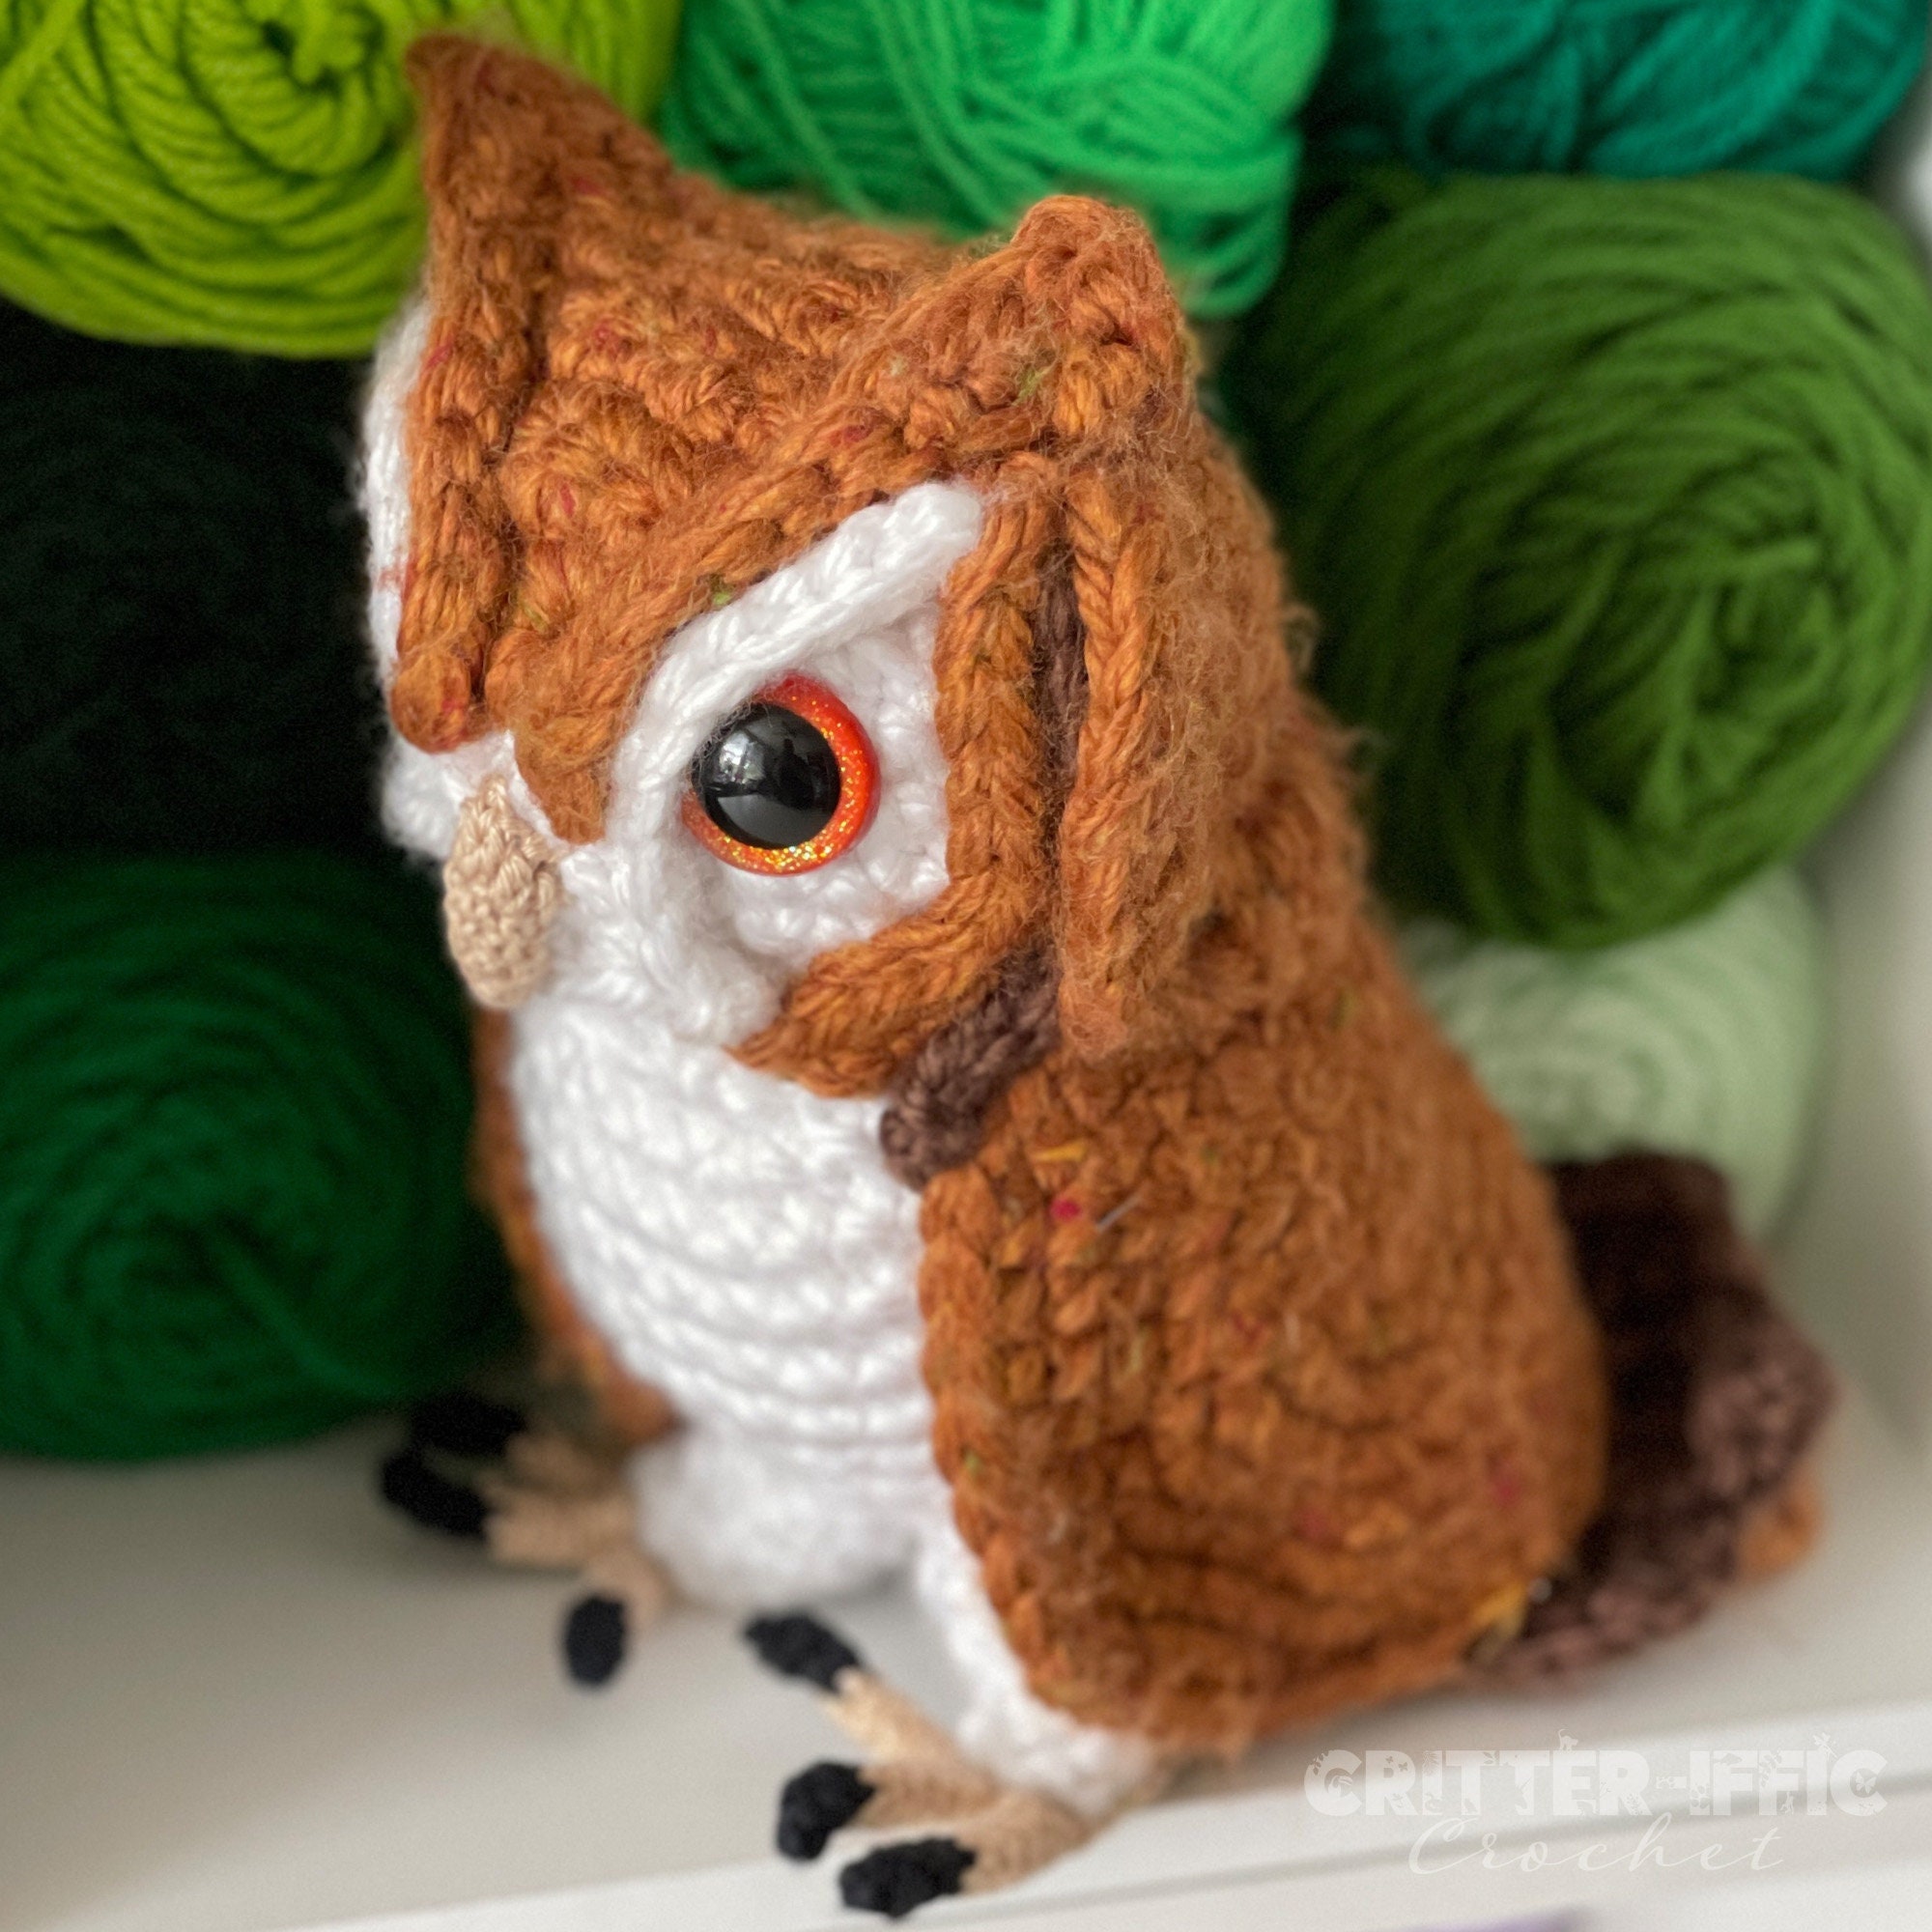  Uongfi The Cute Owl Plush Toy is Exclusive for Girls